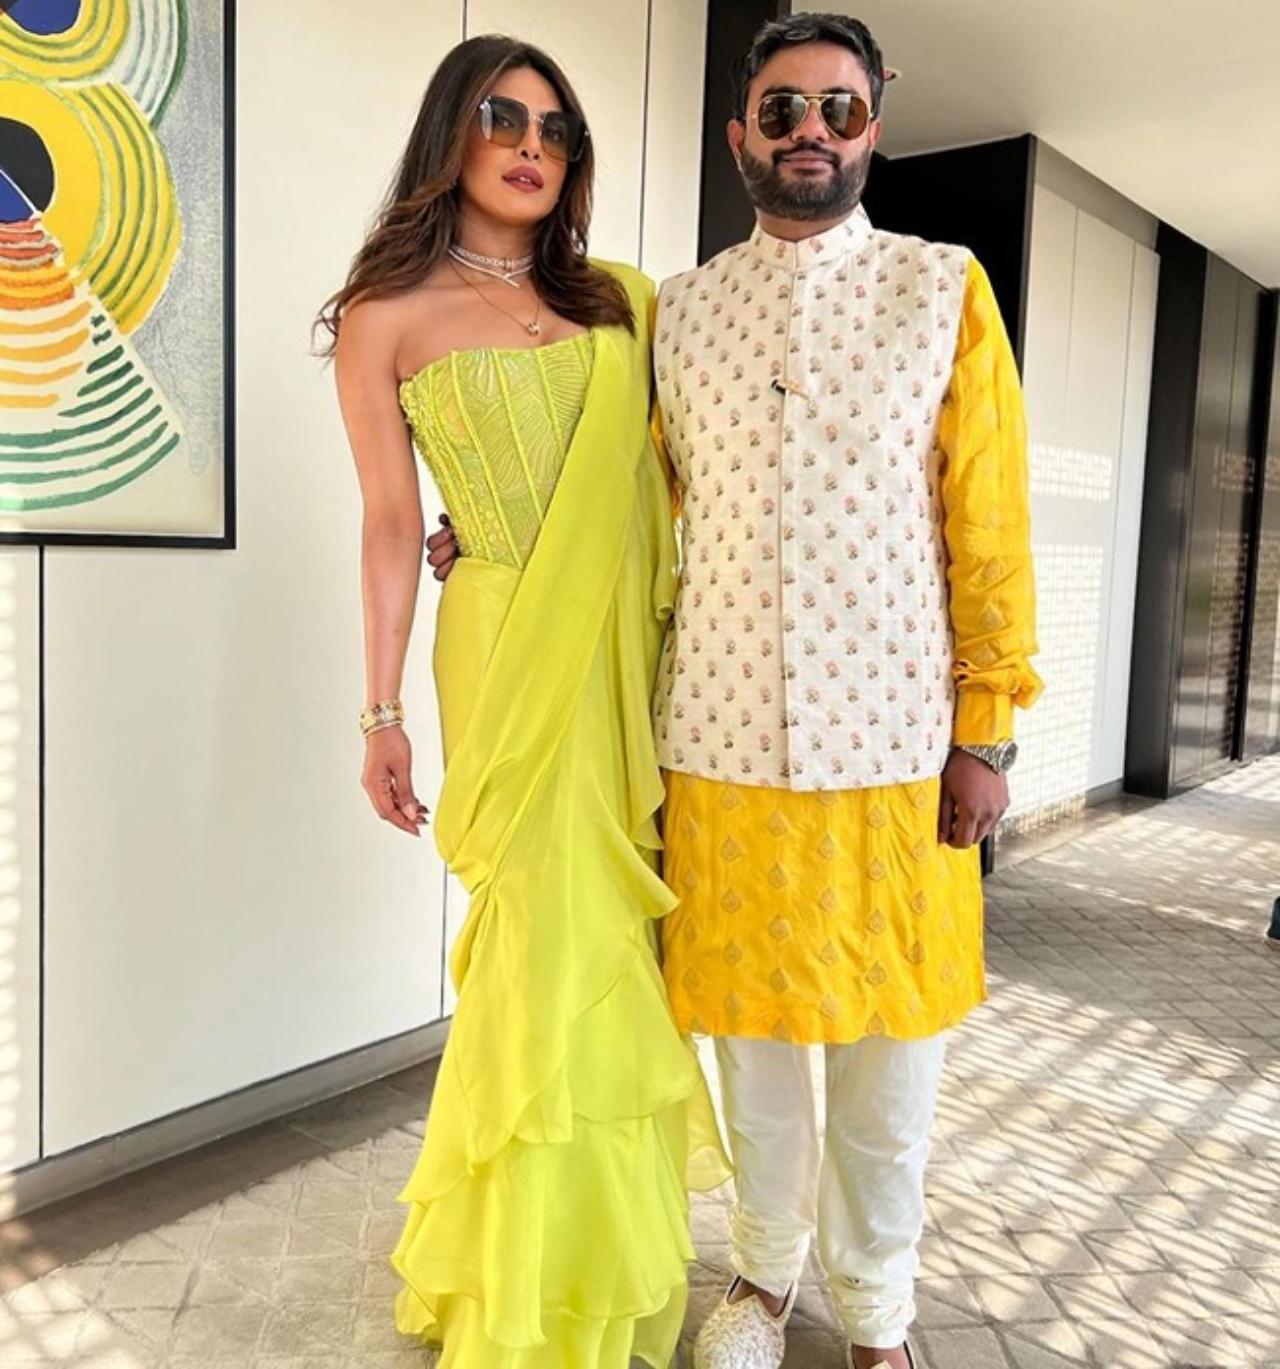 If you want to try something different this Hariyali Teej, you might want to consider looking towards Priyanka Chopra from some ethno-modern style glam. At Parineeti's engagement, Priyanka donned a chic Rs 78,700 lime green ruffled saree by Mishru, paired with a strapless blouse. Styled by Ami Patel, the monotone design and corset detail made her stand out. Go bold this time - the results might surprise you!